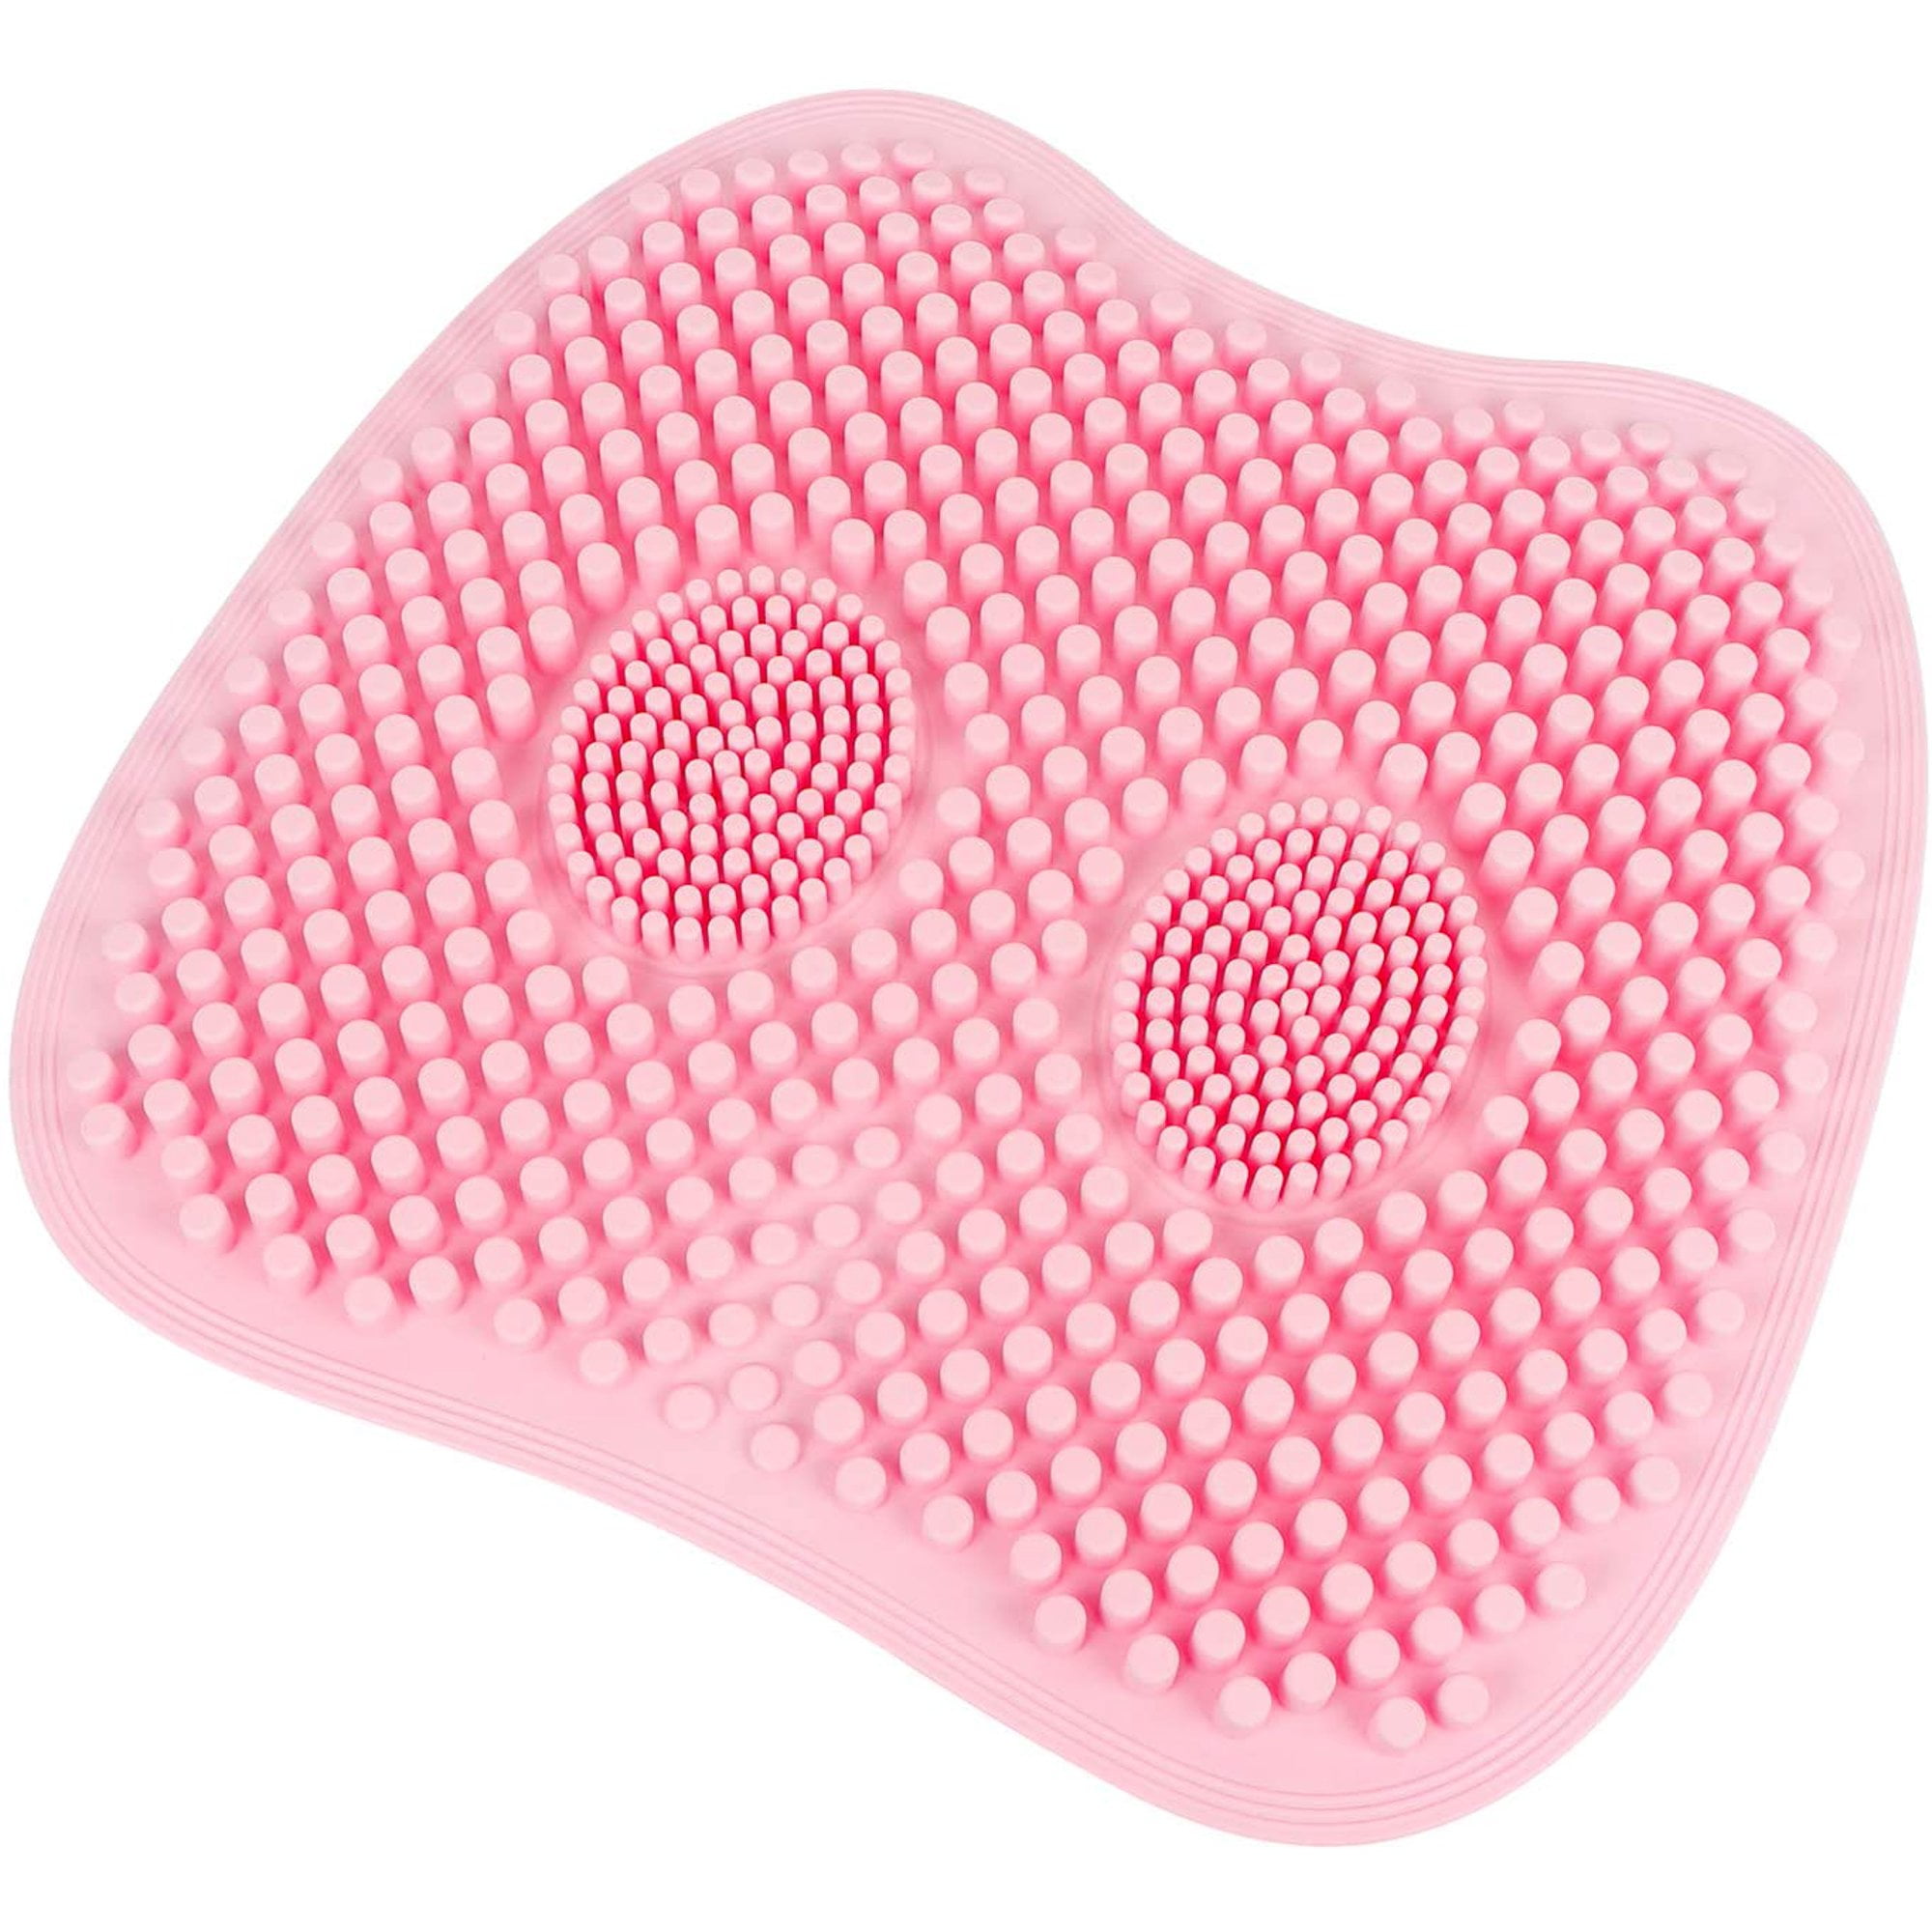 Breathable Silicone Massage Seat Cushion, Back Support, Coccyx and Sciatic  Pain Relief, Easy to Clean - China Breathable Silicoen, Silicone Cushion